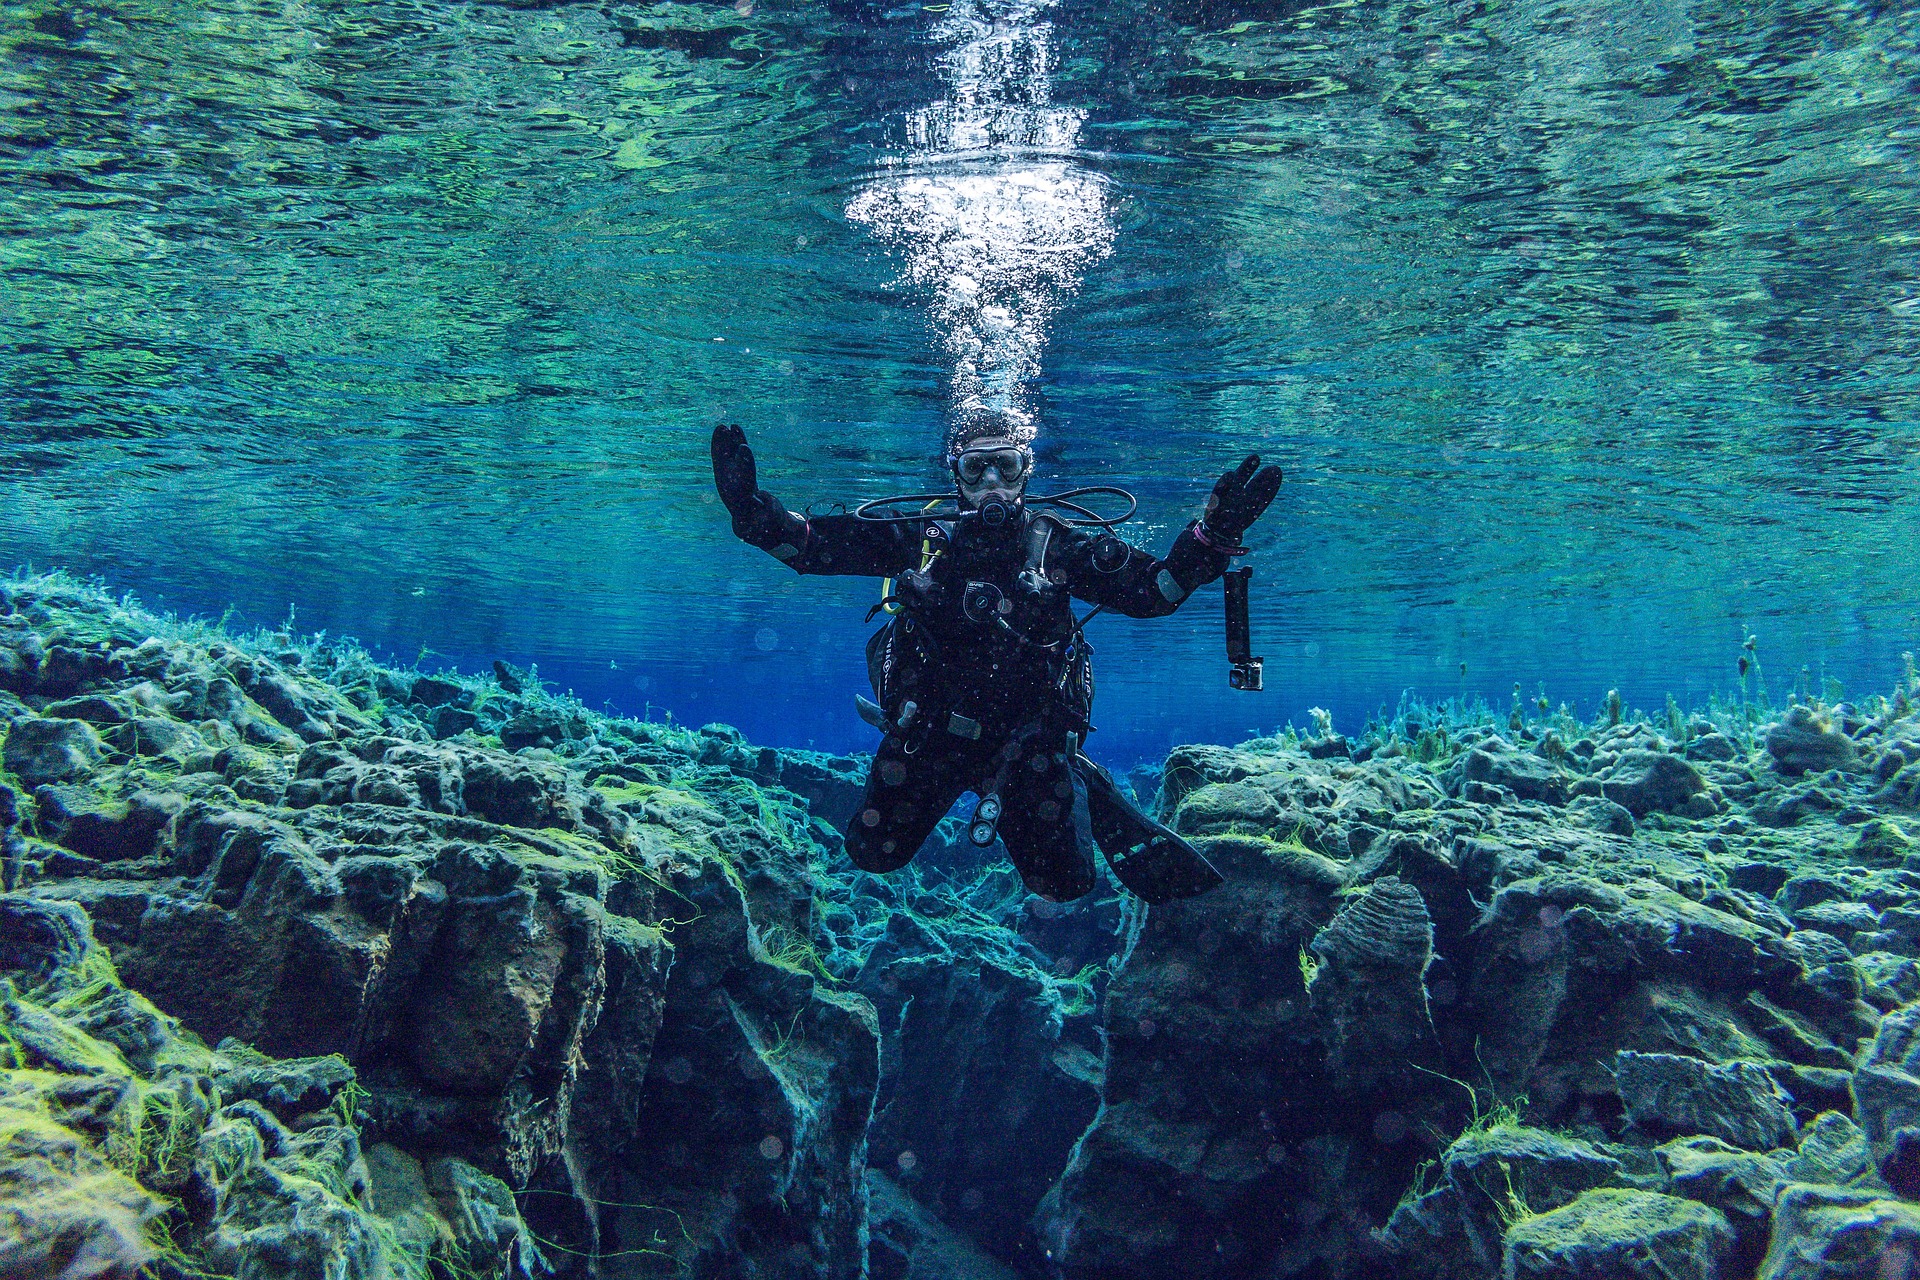 Dry suit diver cold water